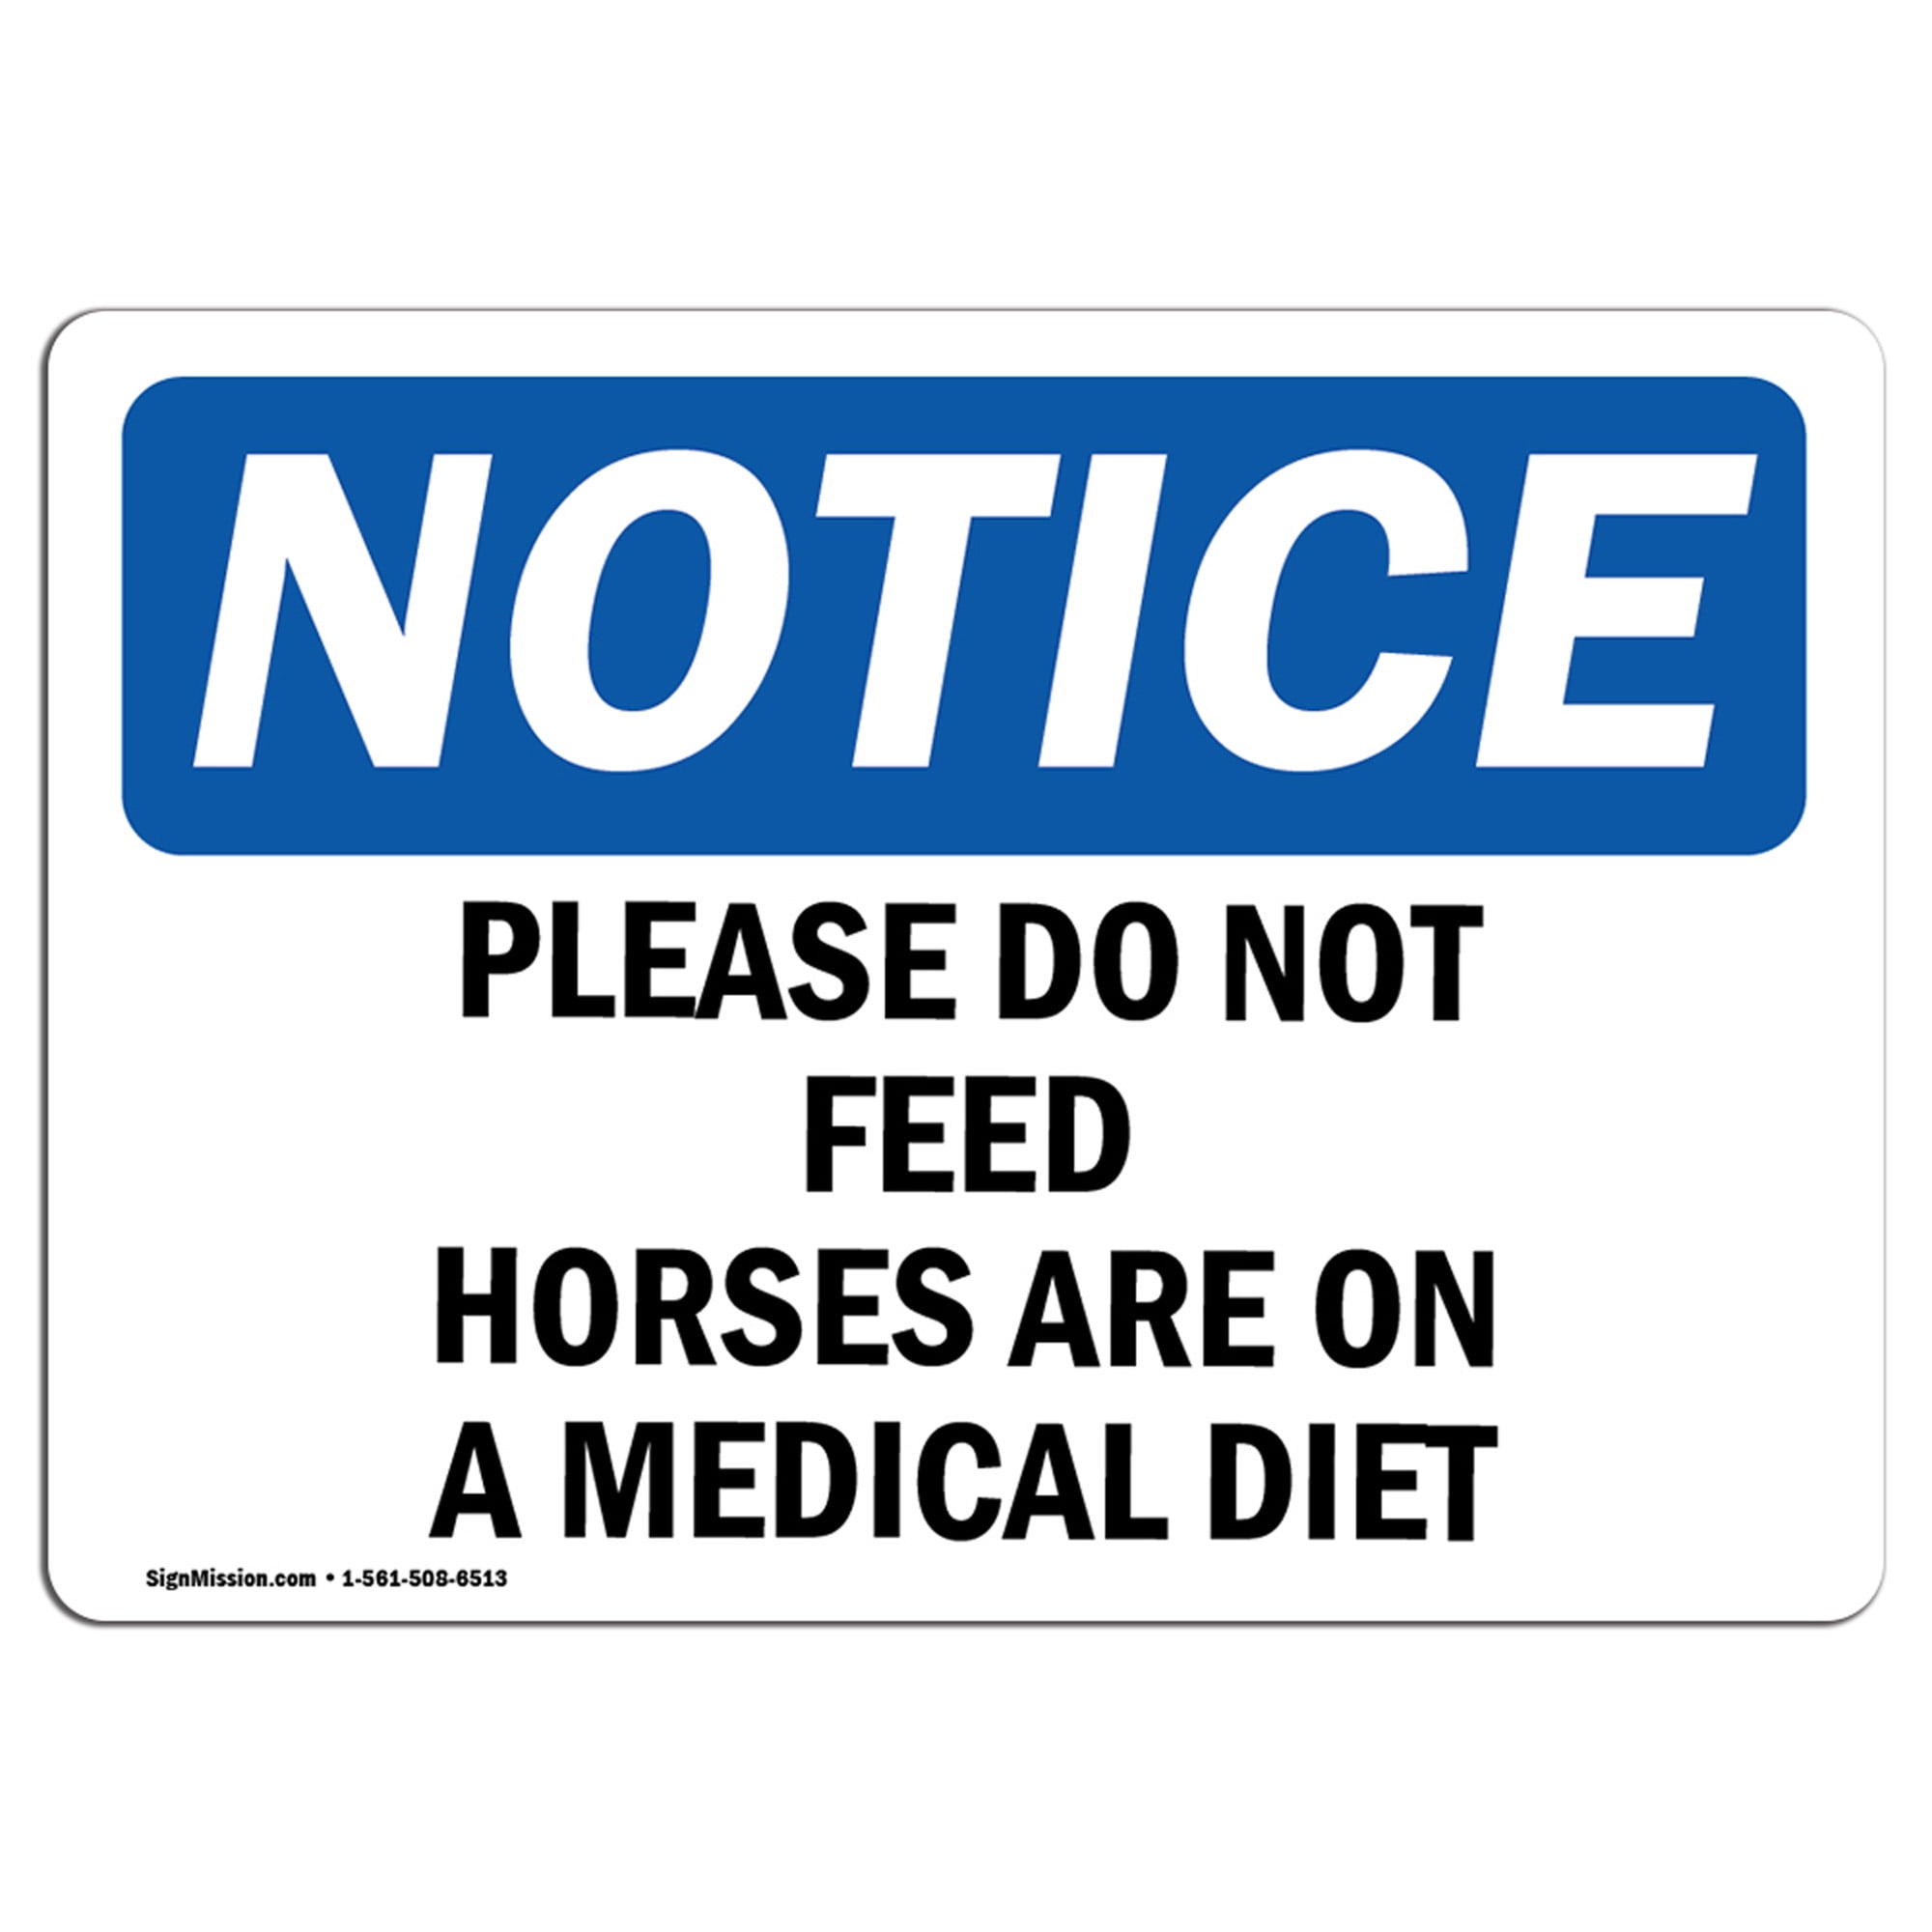 PLEASE DO NOT FEED THE HORSES 2 x SIGNS STRICT DIET LOGO WARNING ALUMINIUM 